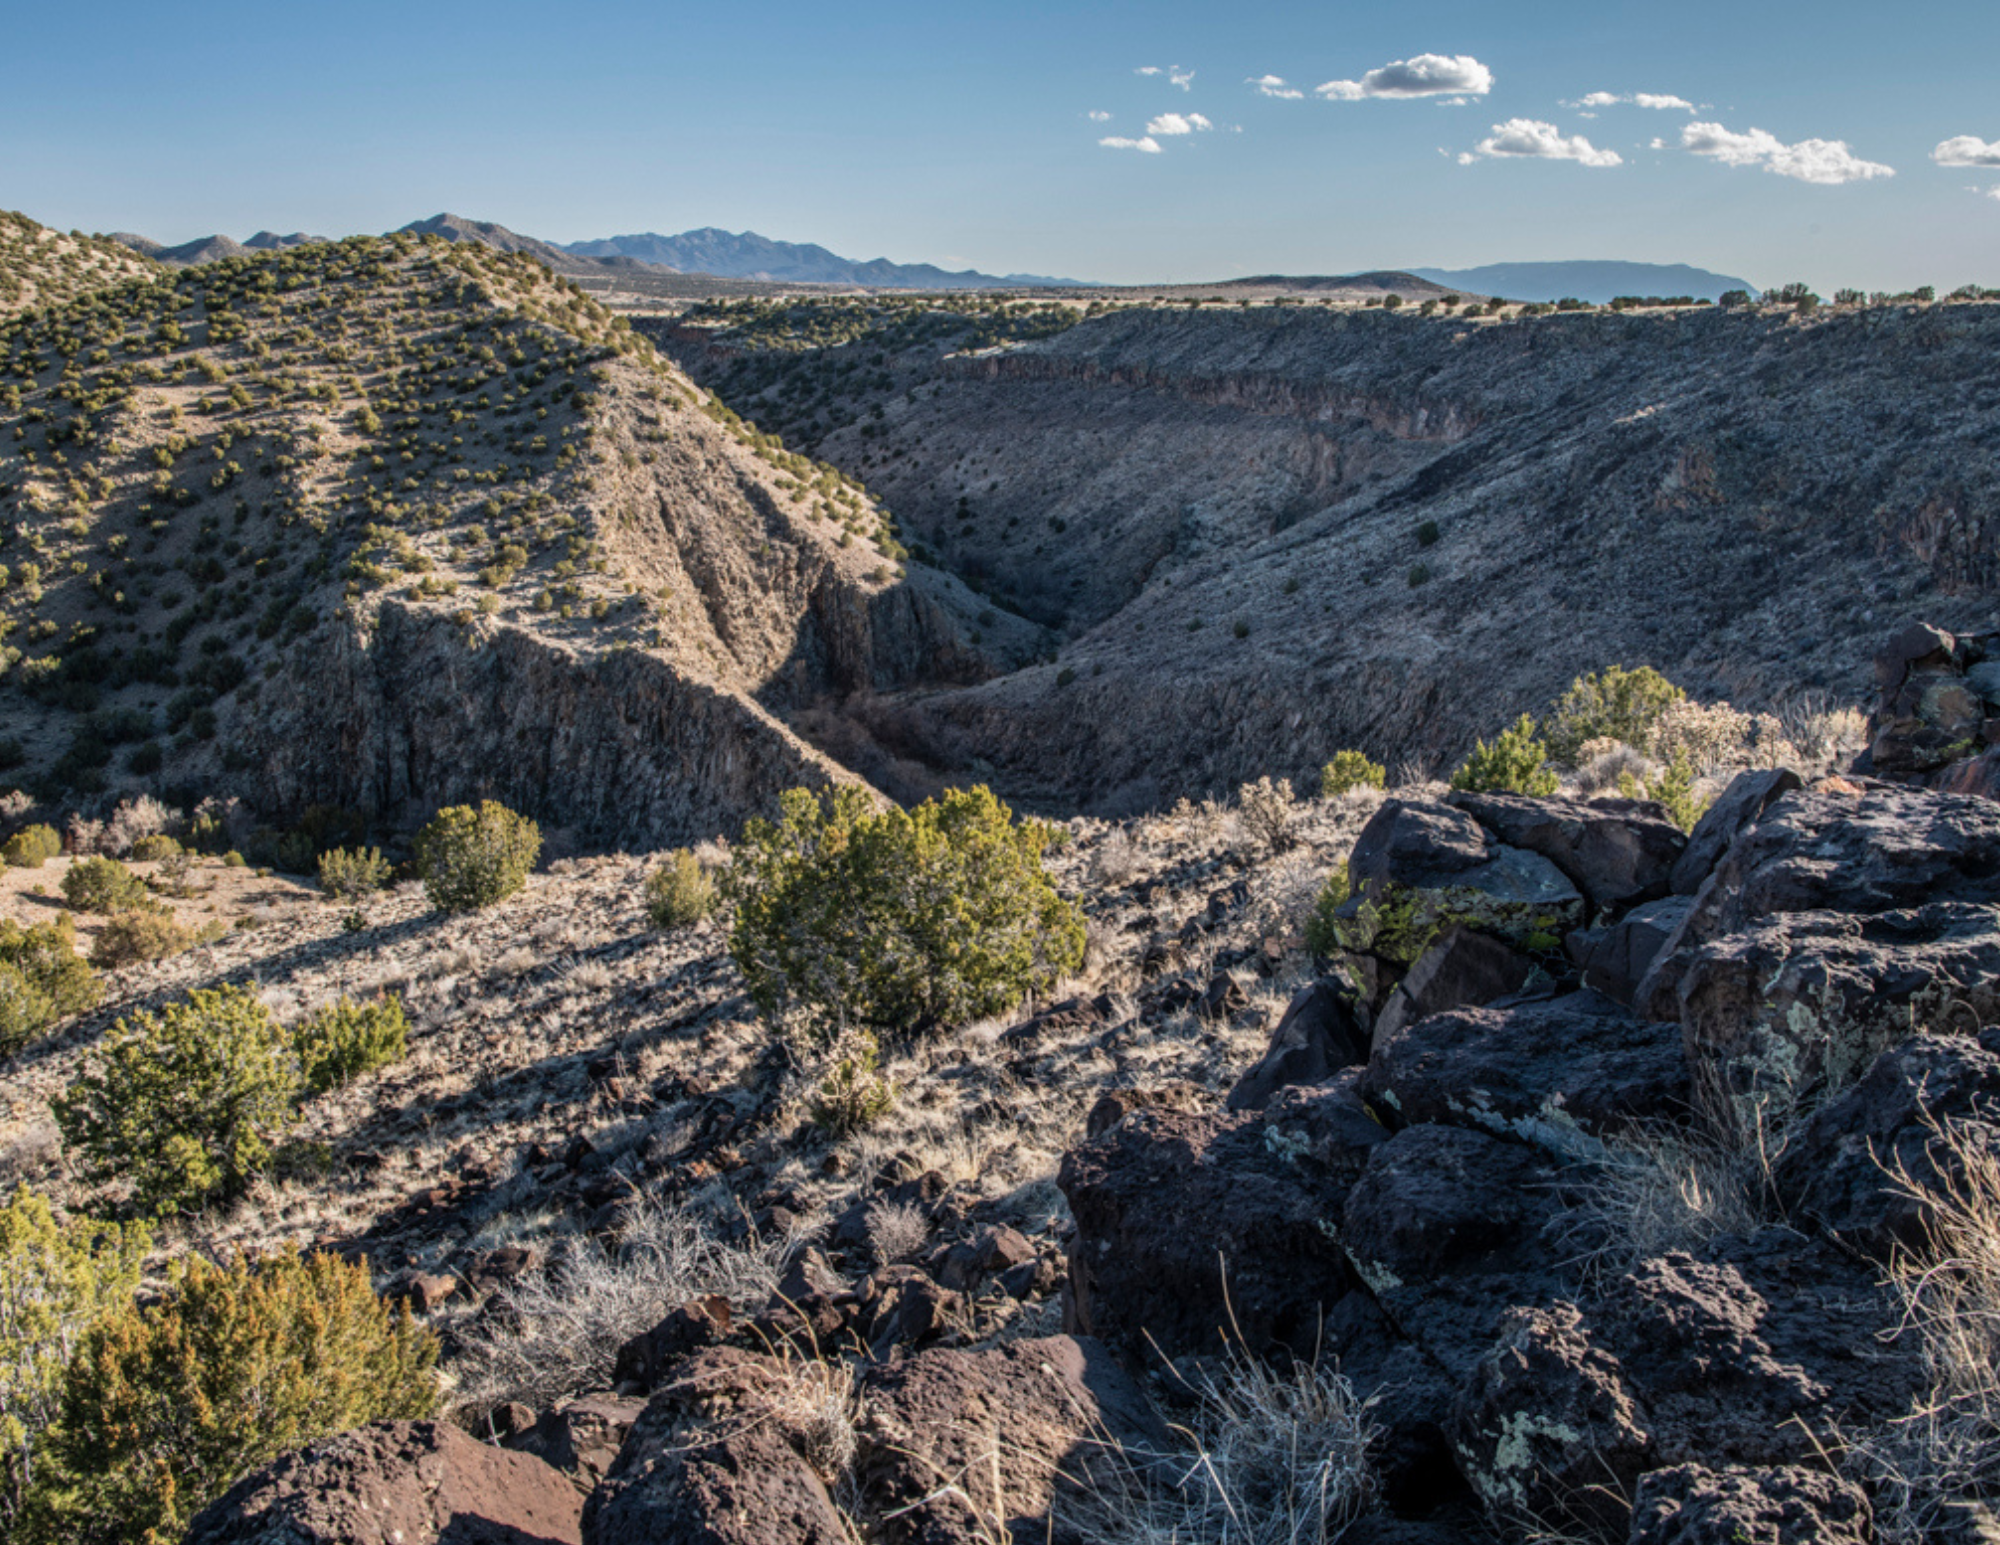 Weigh in on New Mexico’s conservation priorities as part of the 30×30 campaign